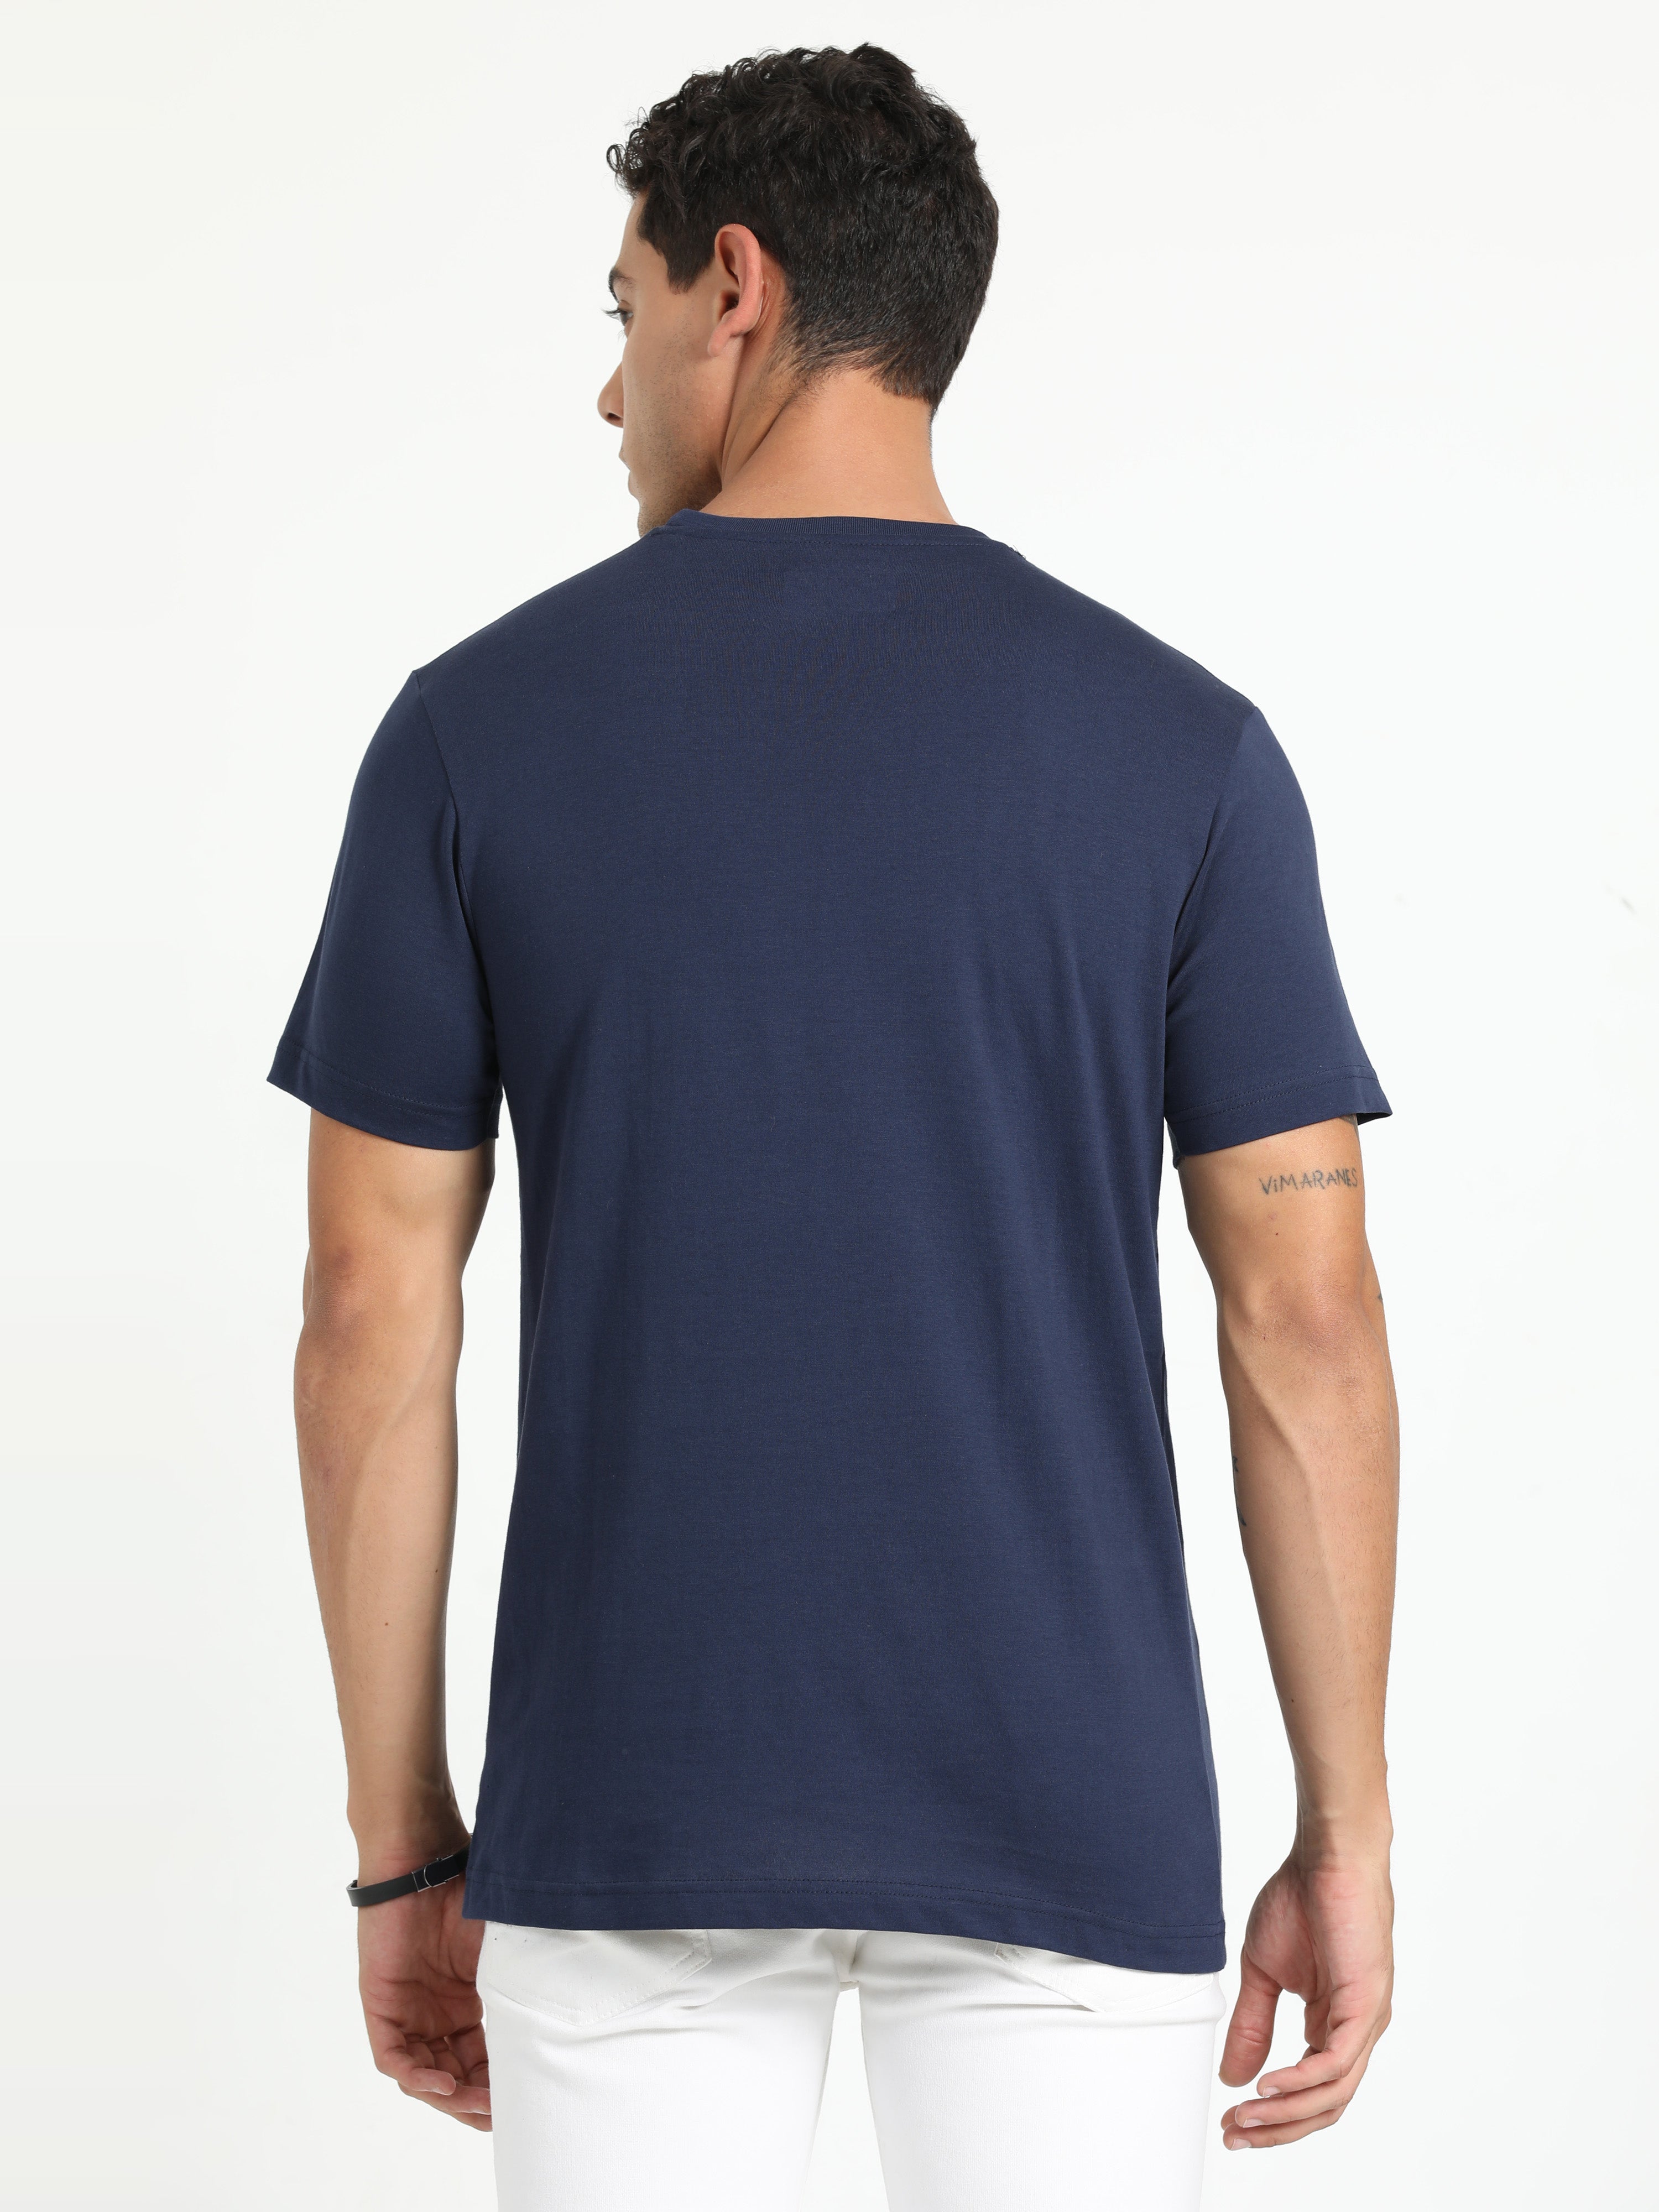 Classic Polo Men's Solid Navy Cotton Half Sleeve T-Shirt | TOY-ARDOR NAVY SF C